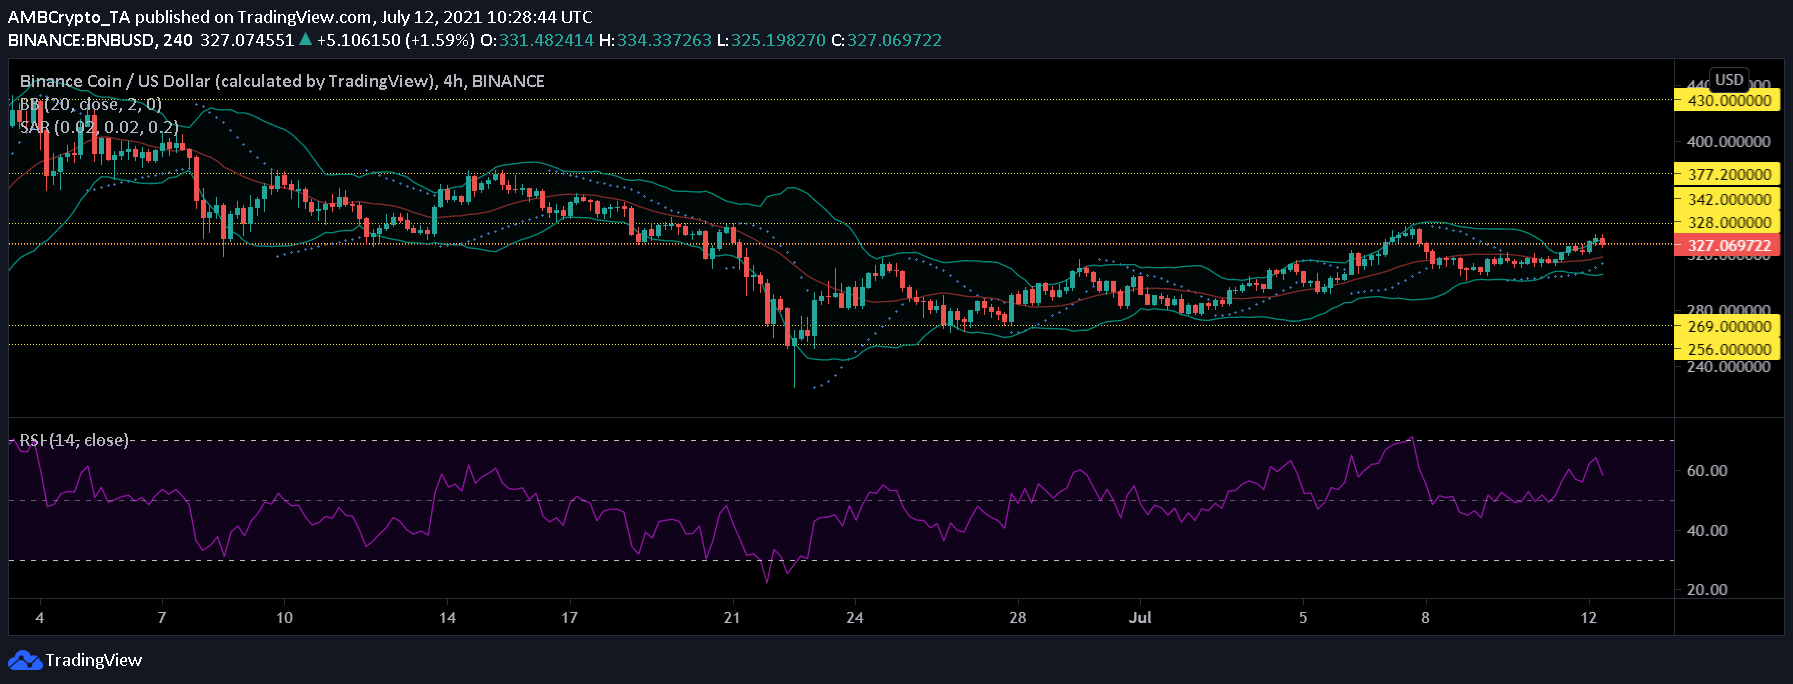 Ethereum, Binance Coin and Chainlink Price Analysis: July 12